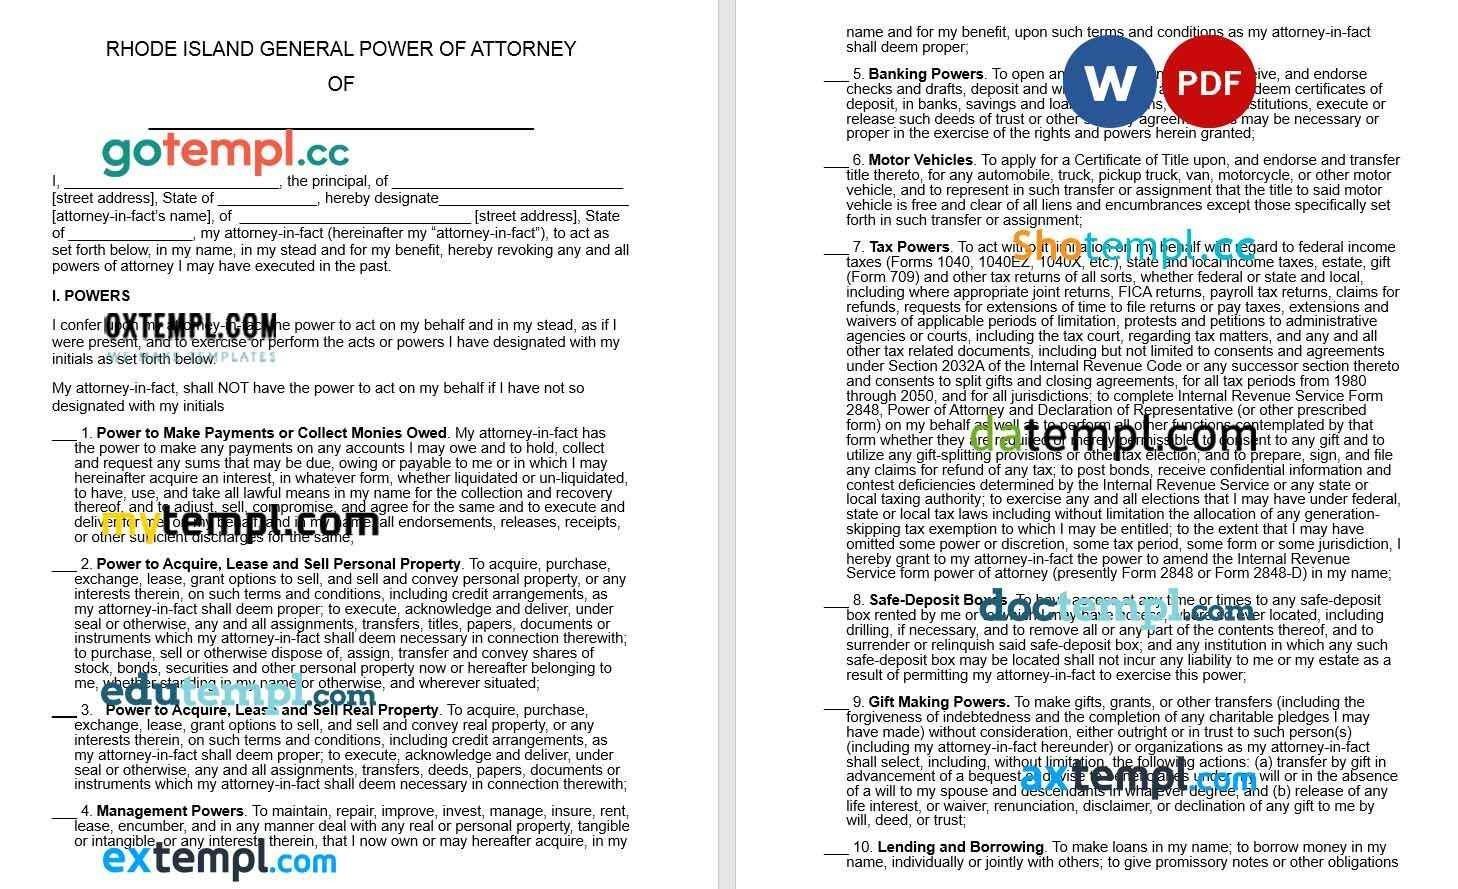 Rhode Island General Power of Attorney example, fully editable